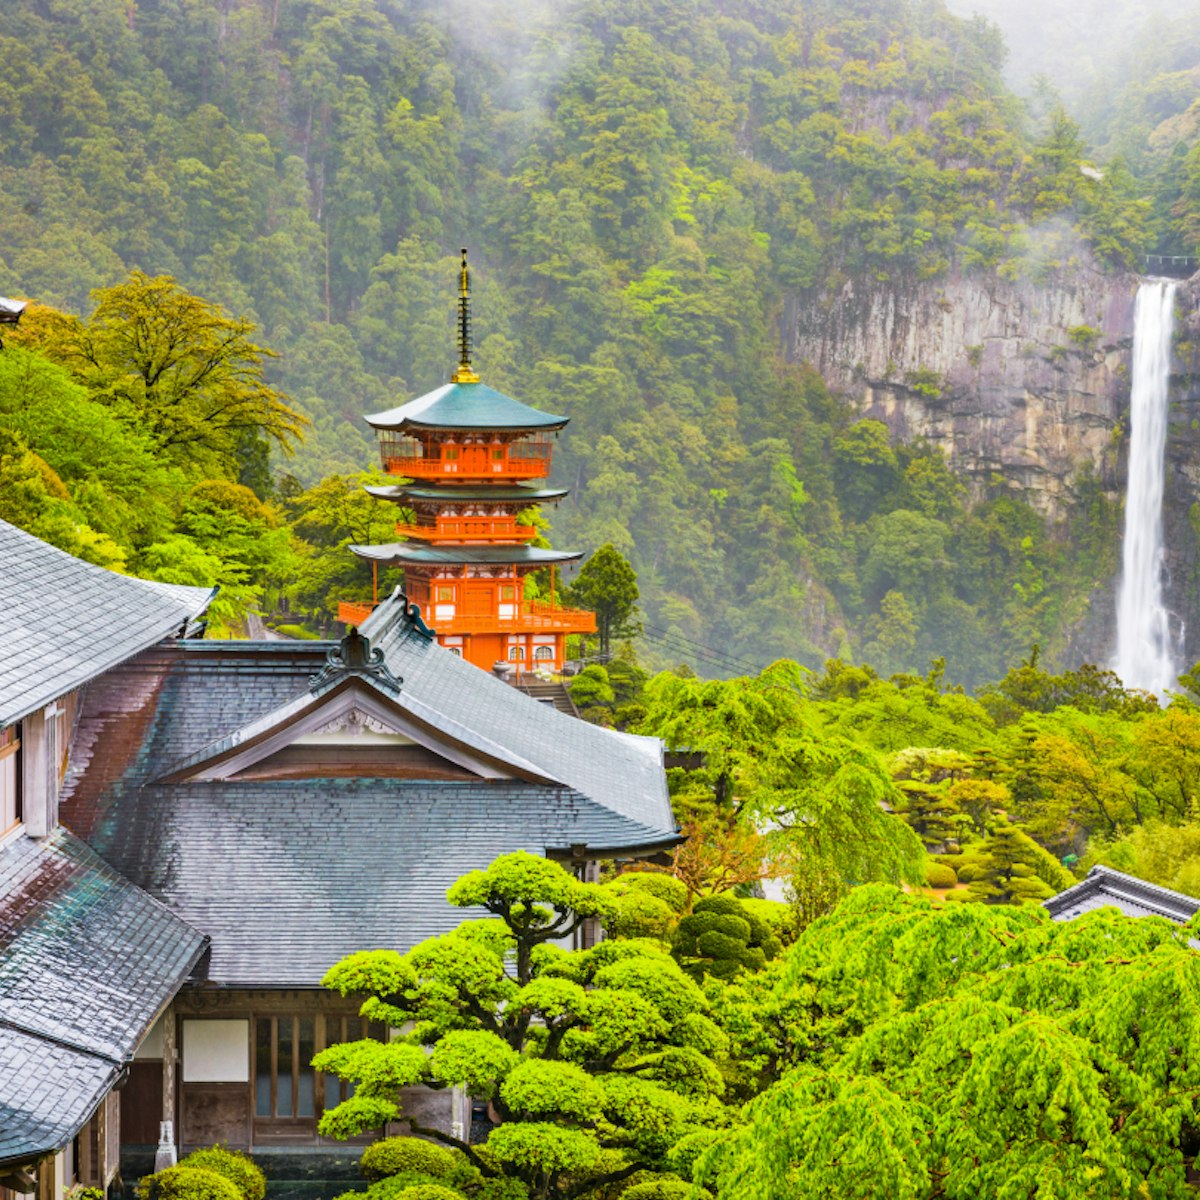 Nachi, Japan at the pagoda of Seigantoji and Nachi no Taki waterfall.; Shutterstock ID 693876538; Your name (First / Last): Laura Crawford; GL account no.: 65050; Netsuite department name: Online Editorial; Full Product or Project name including edition: Kii Peninsula page online images for BiT